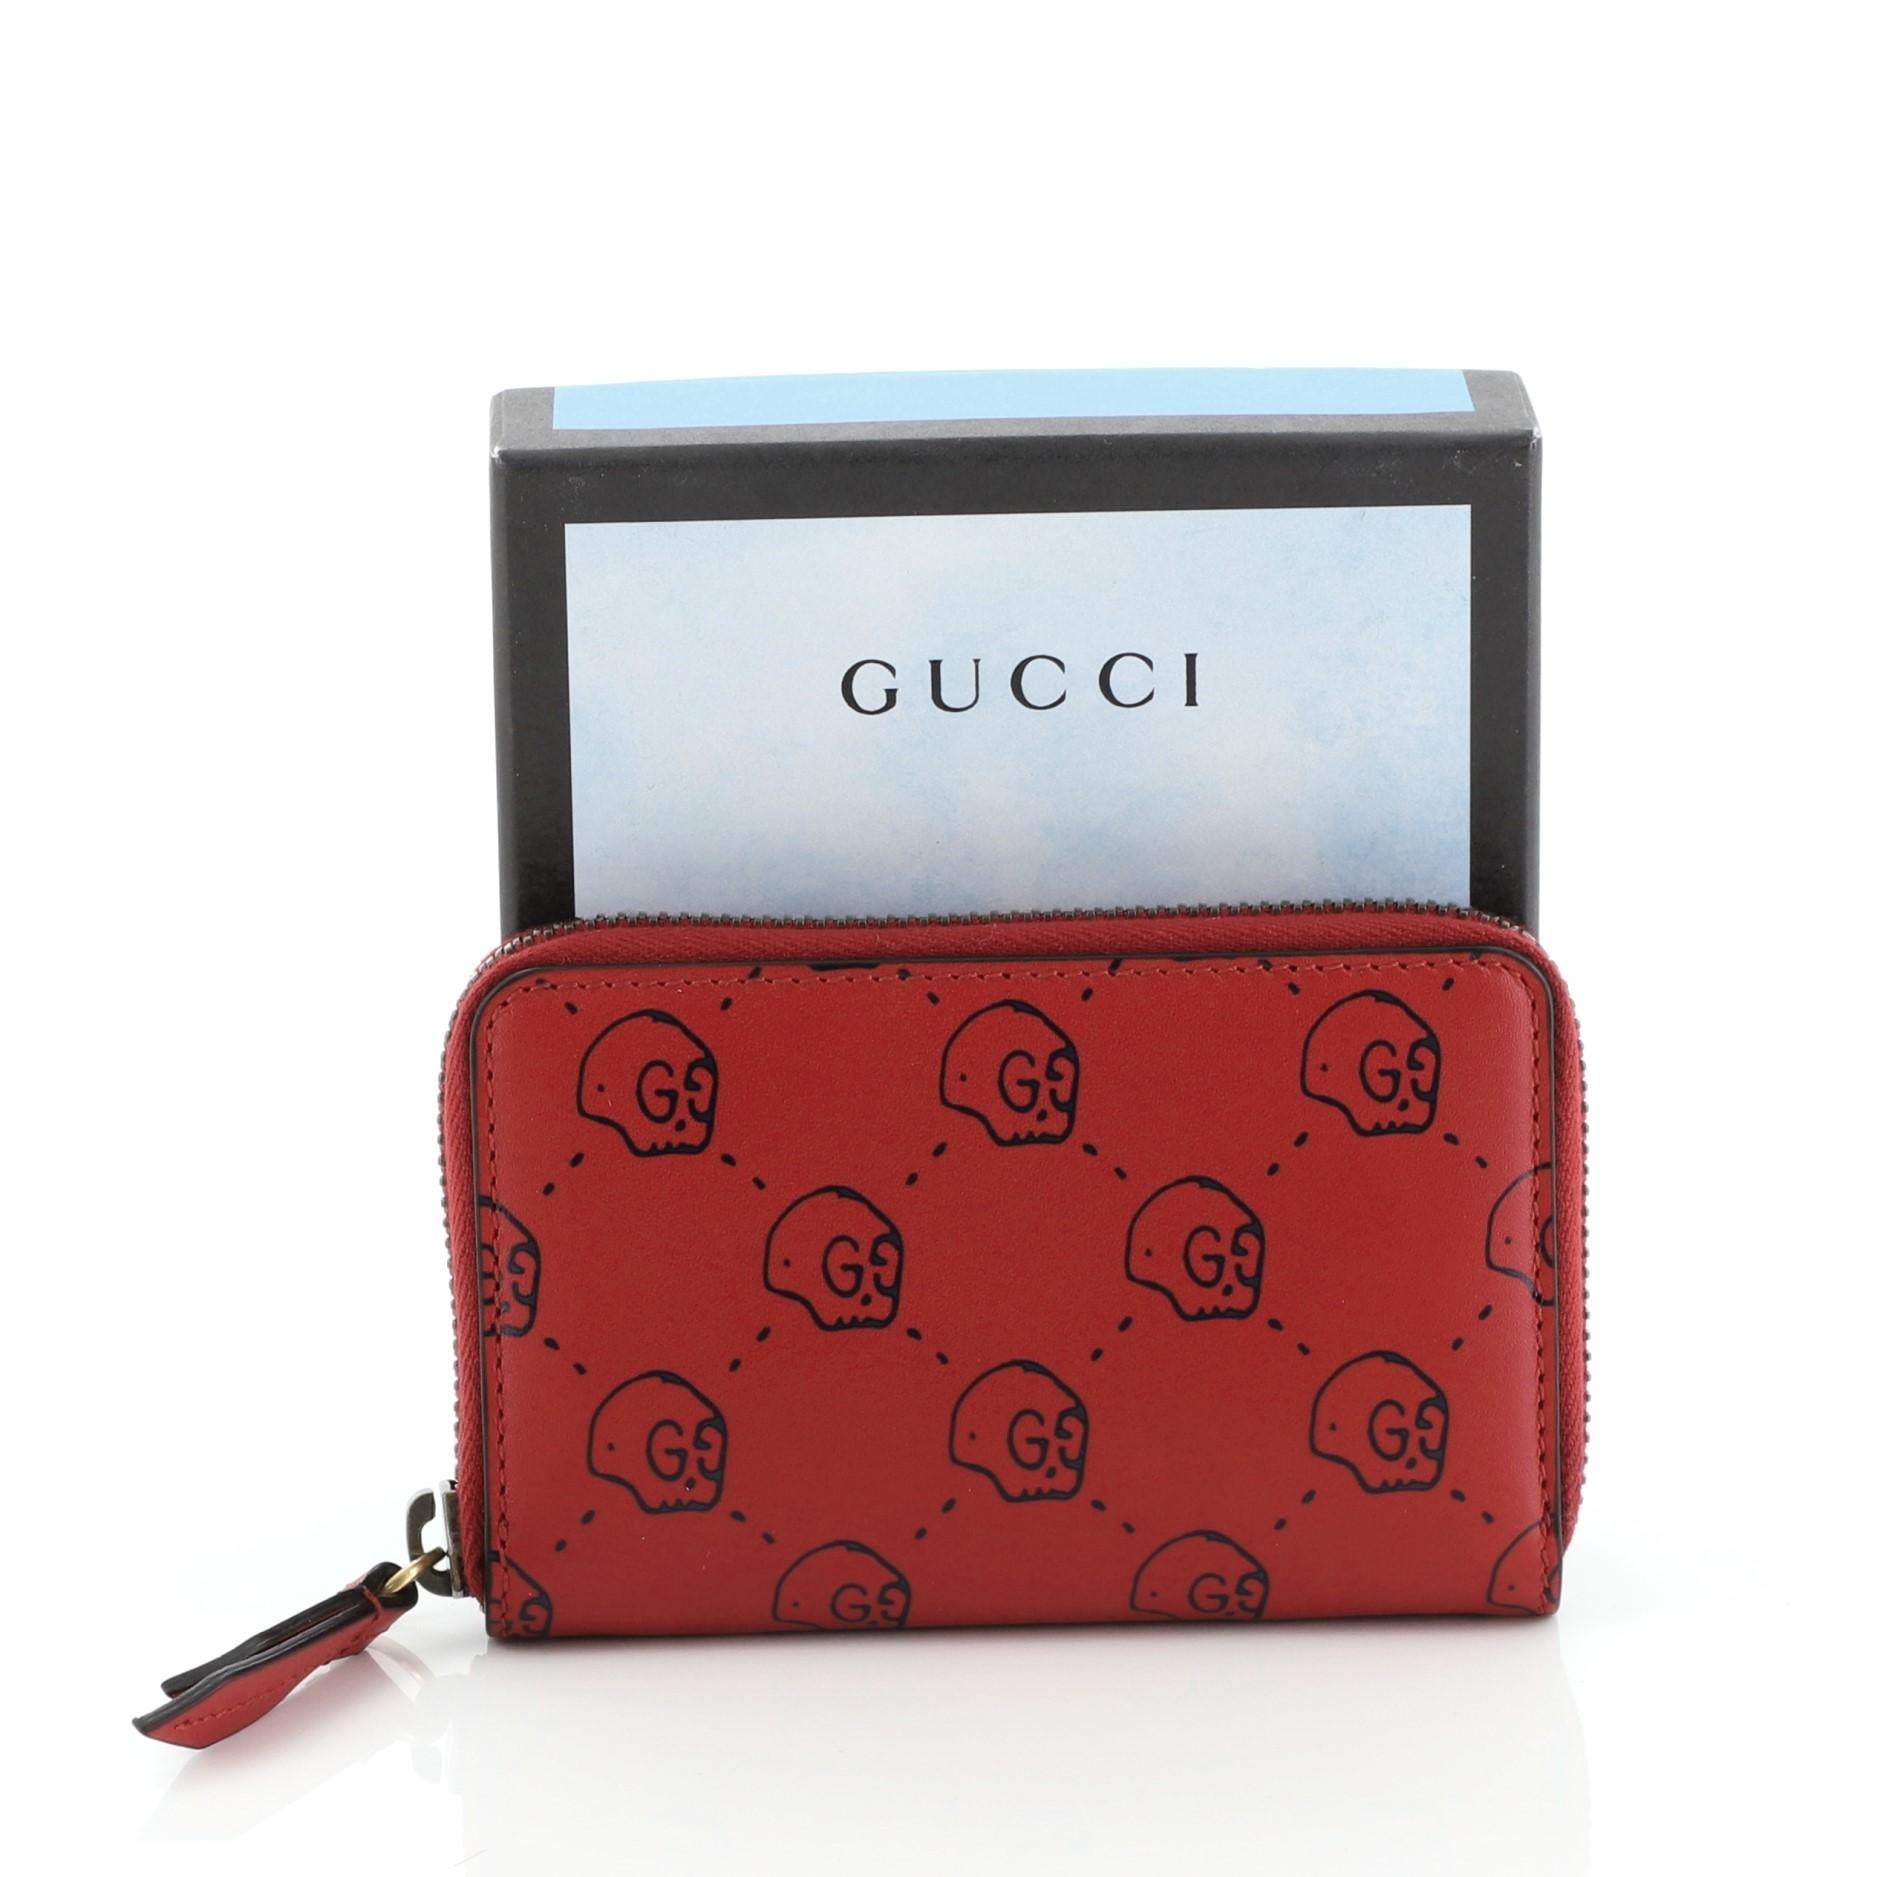 This Gucci Zip Around Card Case GucciGhost Leather, crafted from red printed leather, features GucciGhost print and aged gold-tone hardware. Its zip around closure opens to a red leather and black fabric interior with slip pockets. 

Condition: